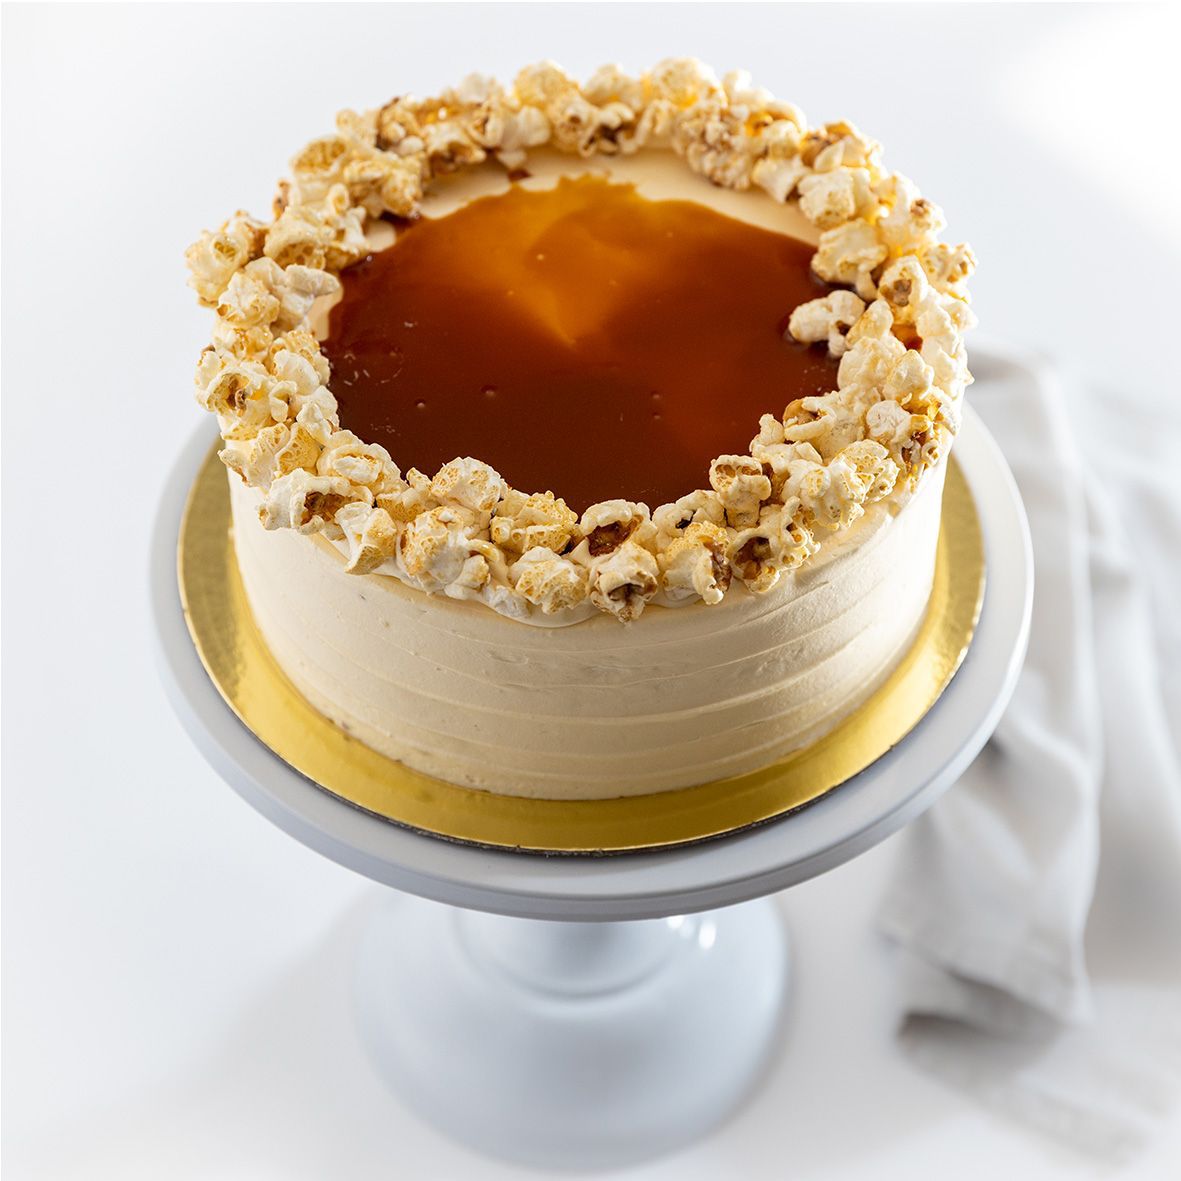 Salted caramel cake by pastel cakes